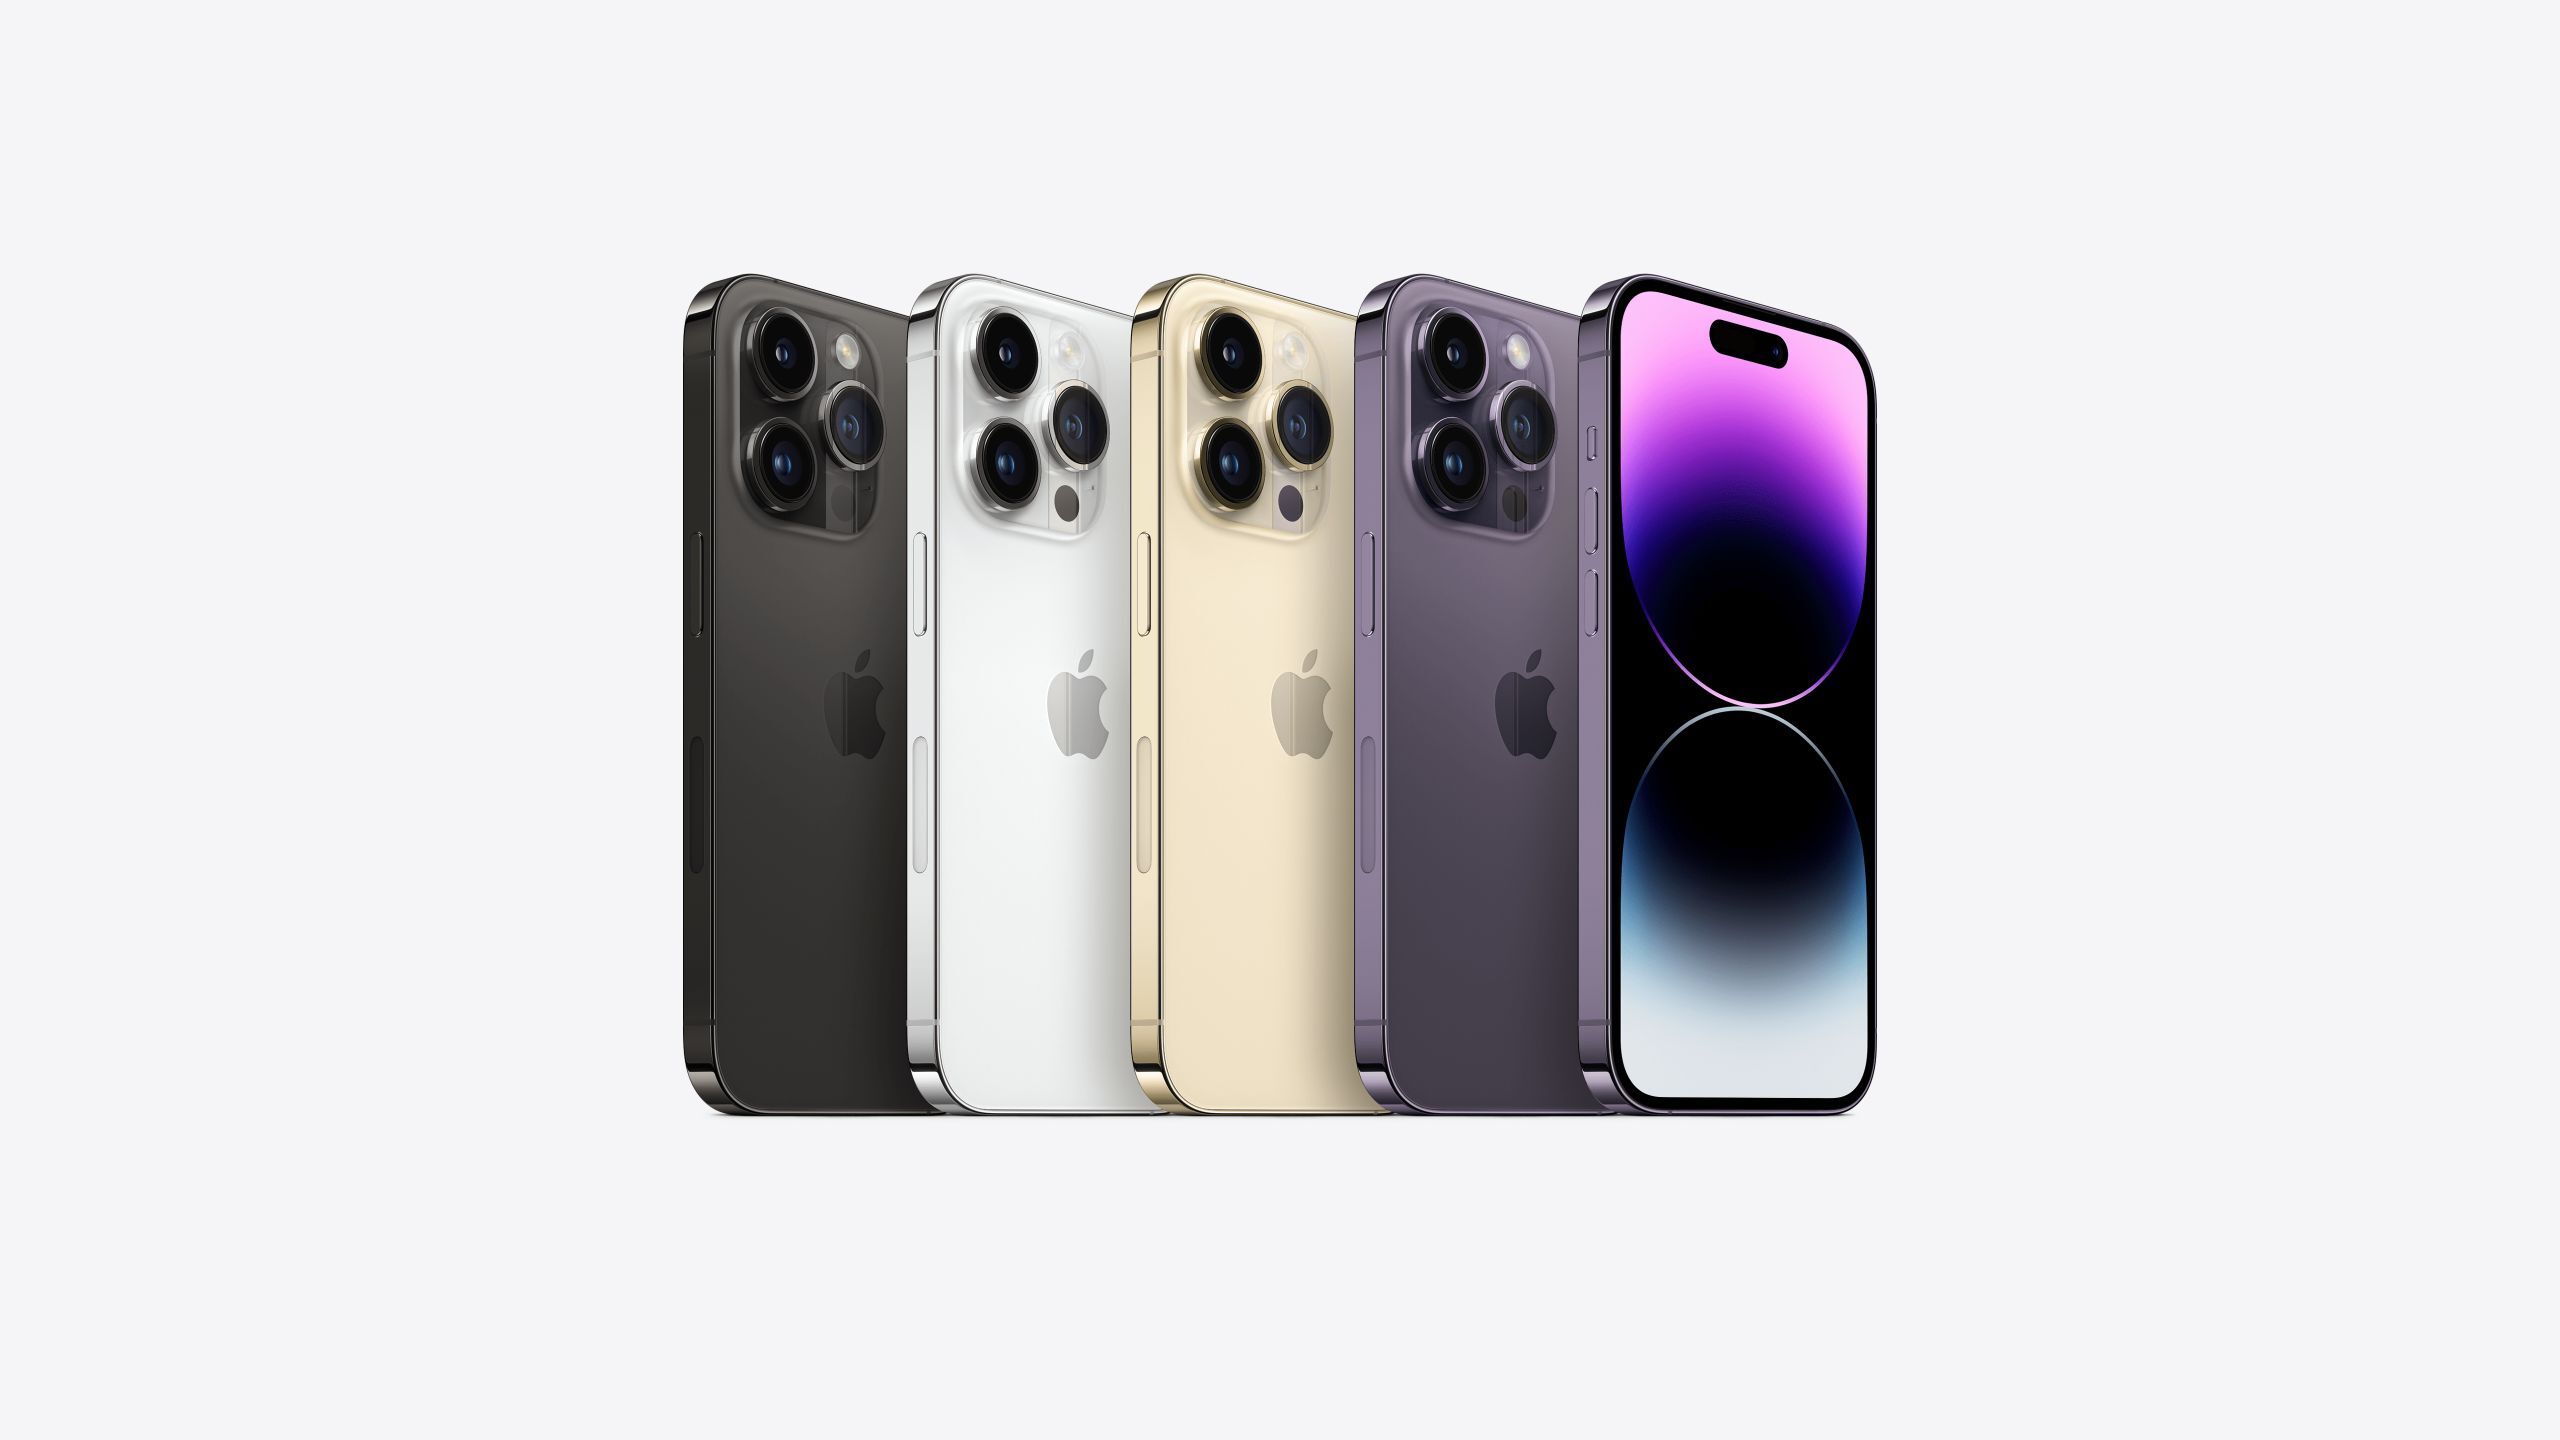 Apple iPhone 14 Pro and Pro Max color options - Apple iPhone 14 release date, price and features